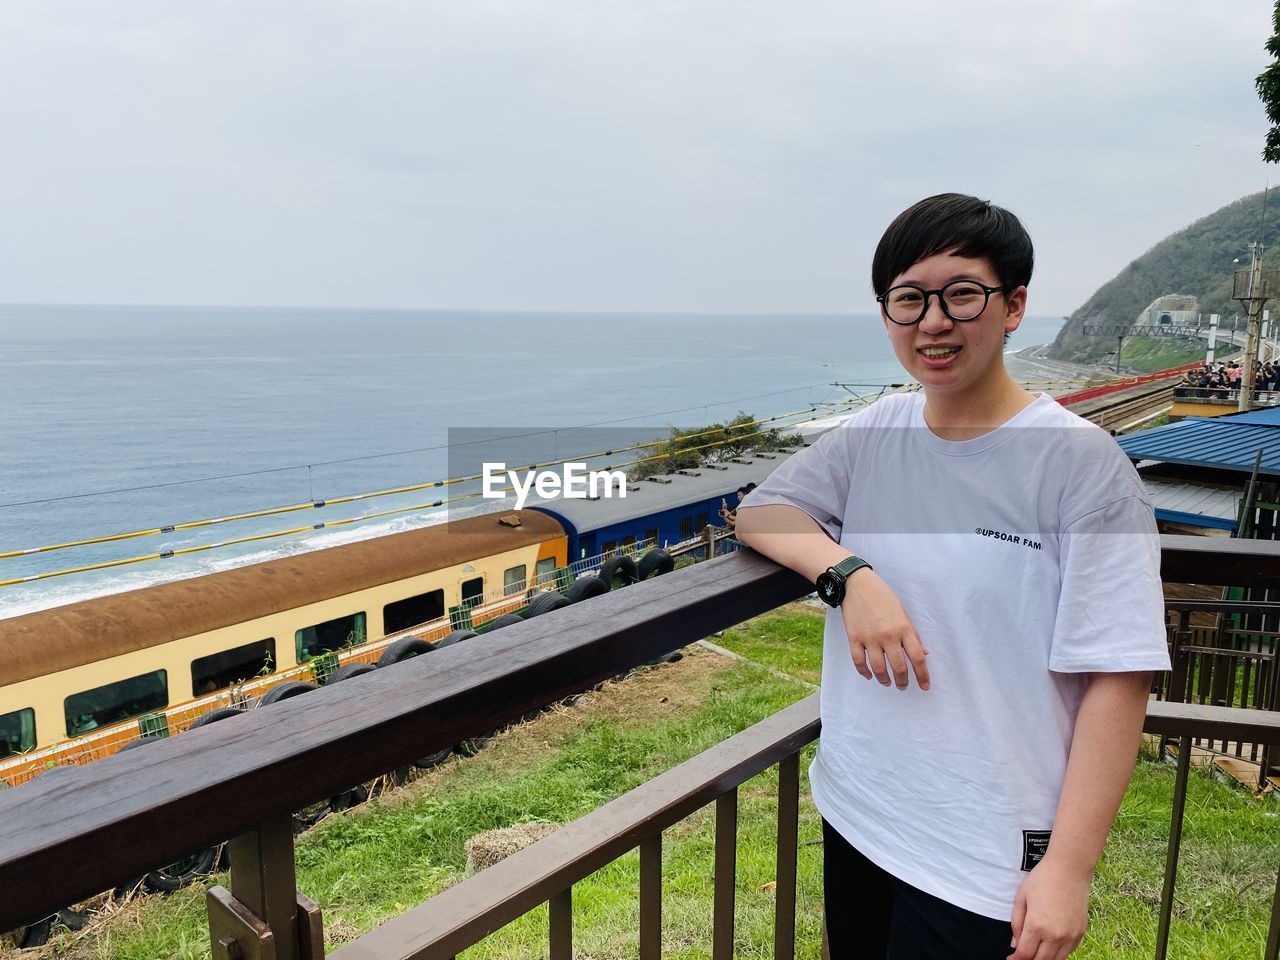 vacation, one person, water, smiling, glasses, railing, sea, casual clothing, standing, nature, young adult, adult, happiness, sky, lifestyles, portrait, leisure activity, vehicle, looking at camera, day, front view, eyeglasses, architecture, men, three quarter length, emotion, travel, transportation, outdoors, tourism, clothing, waist up, person, sunglasses, fashion, land, t-shirt, cheerful, holiday, beauty in nature, built structure, scenics - nature